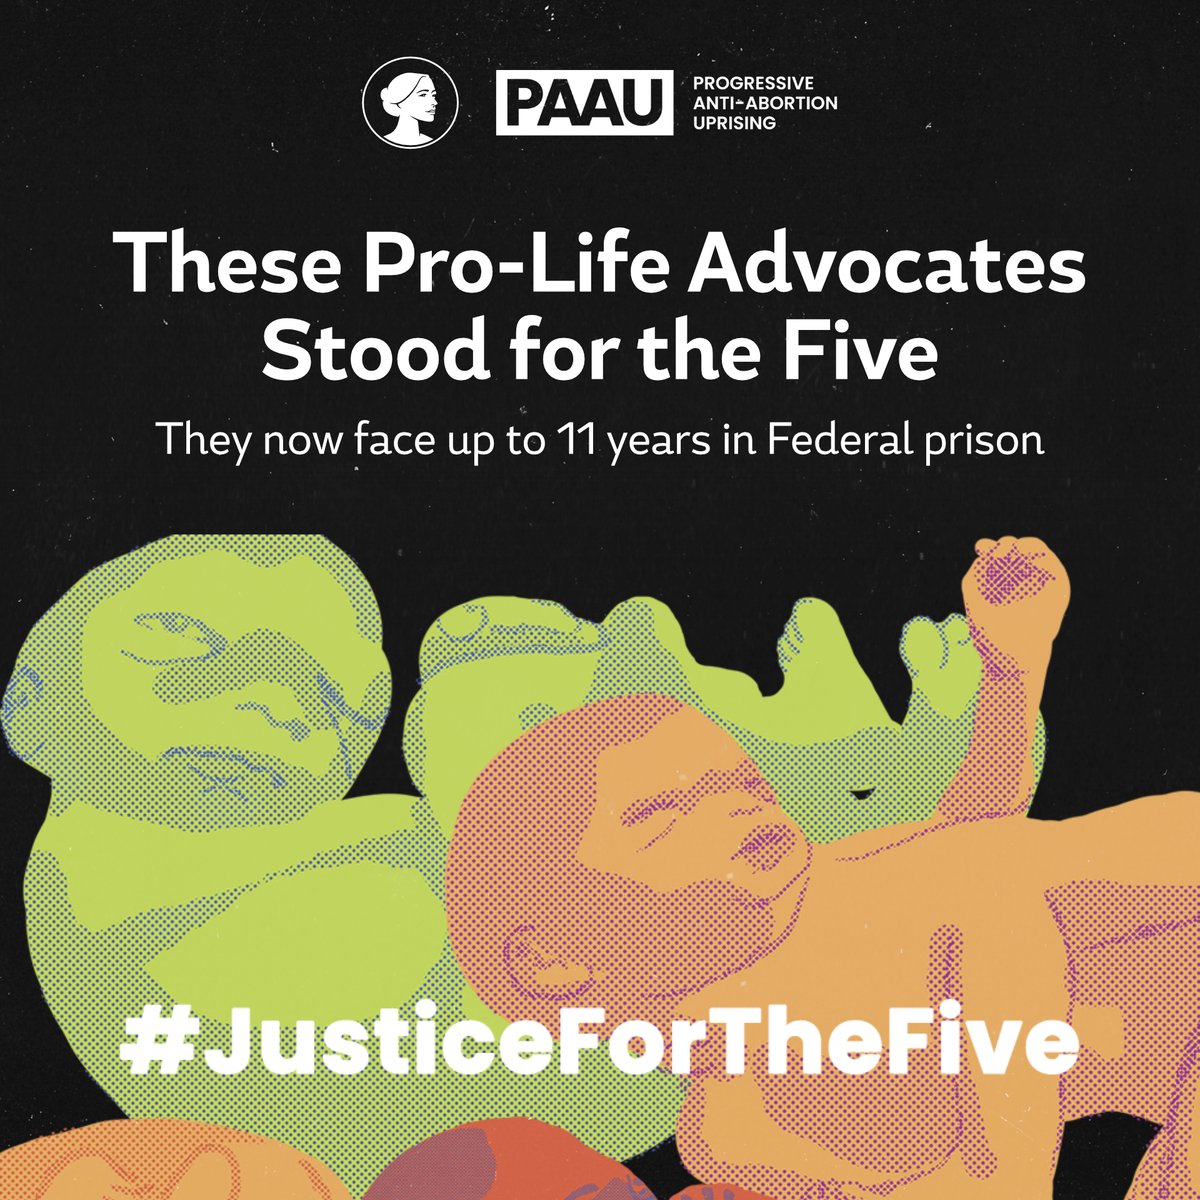 These Pro-Life advocates stood for the Five. They now face up to 11 years in Federal prison. #JusticeForTheFive @PAAUNOW